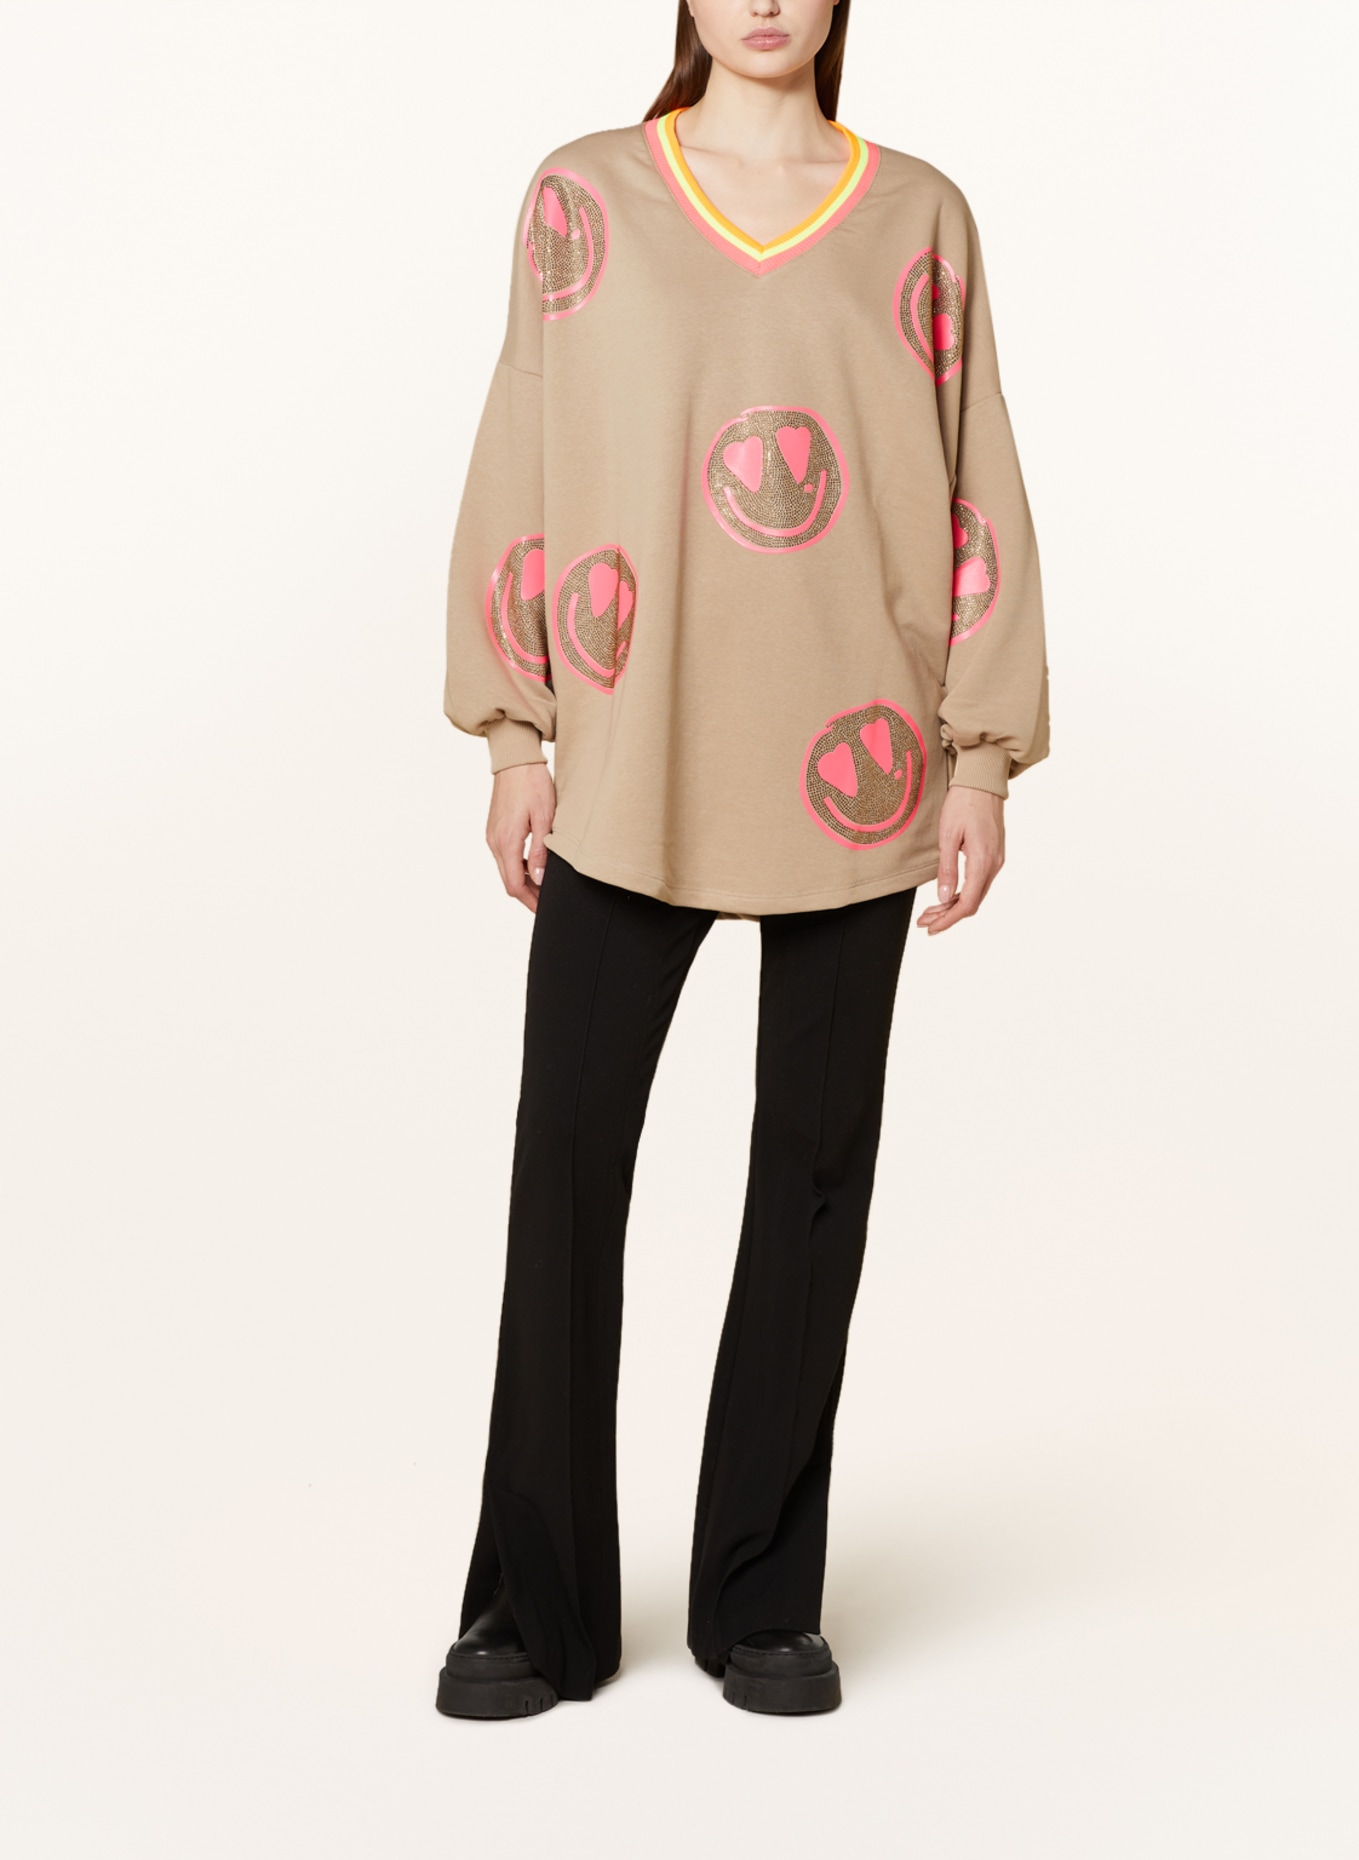 miss goodlife Oversized sweatshirt HAPPY FACE with decorative gems, Color: BEIGE/ NEON PINK/ GOLD (Image 2)